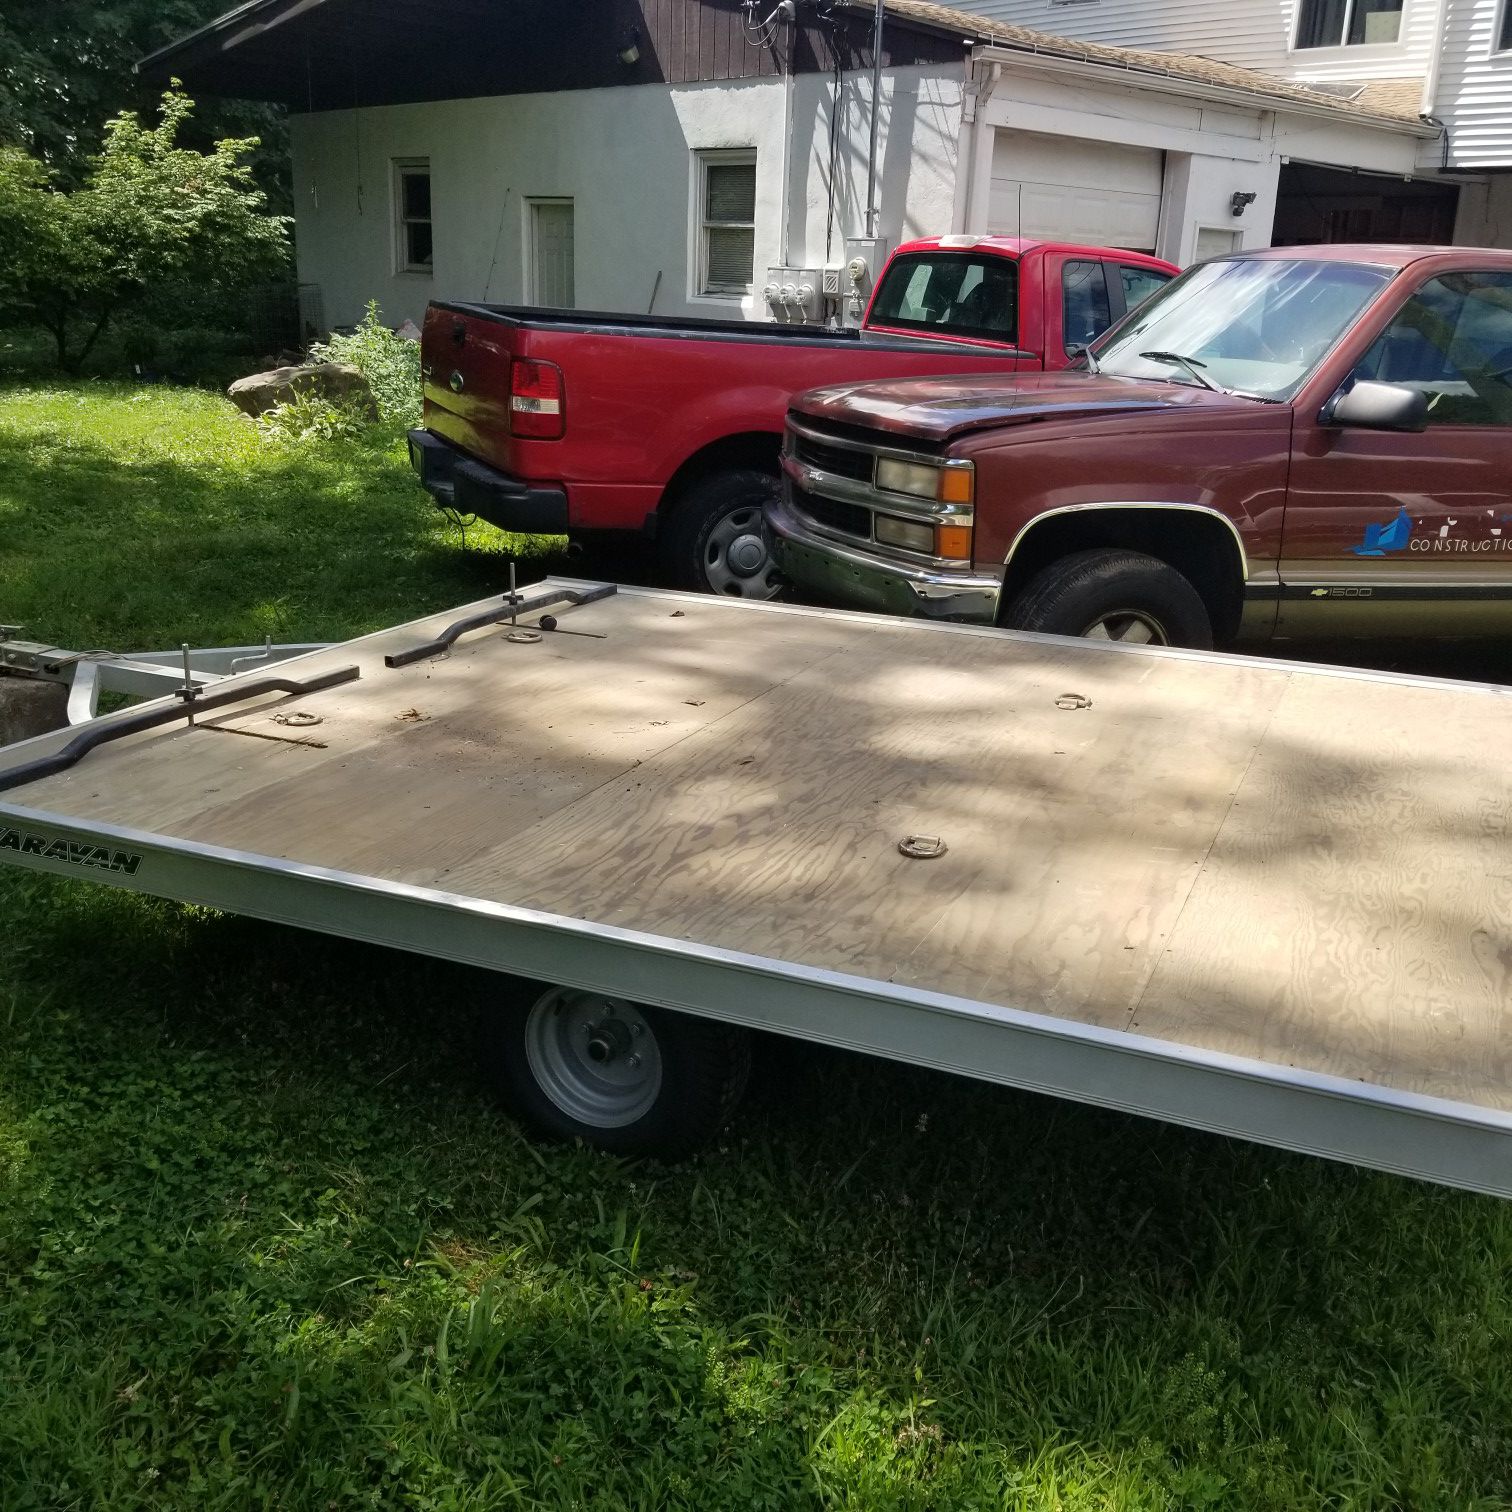 ATV snow mobile trailer 10x8ft $1500 used once.